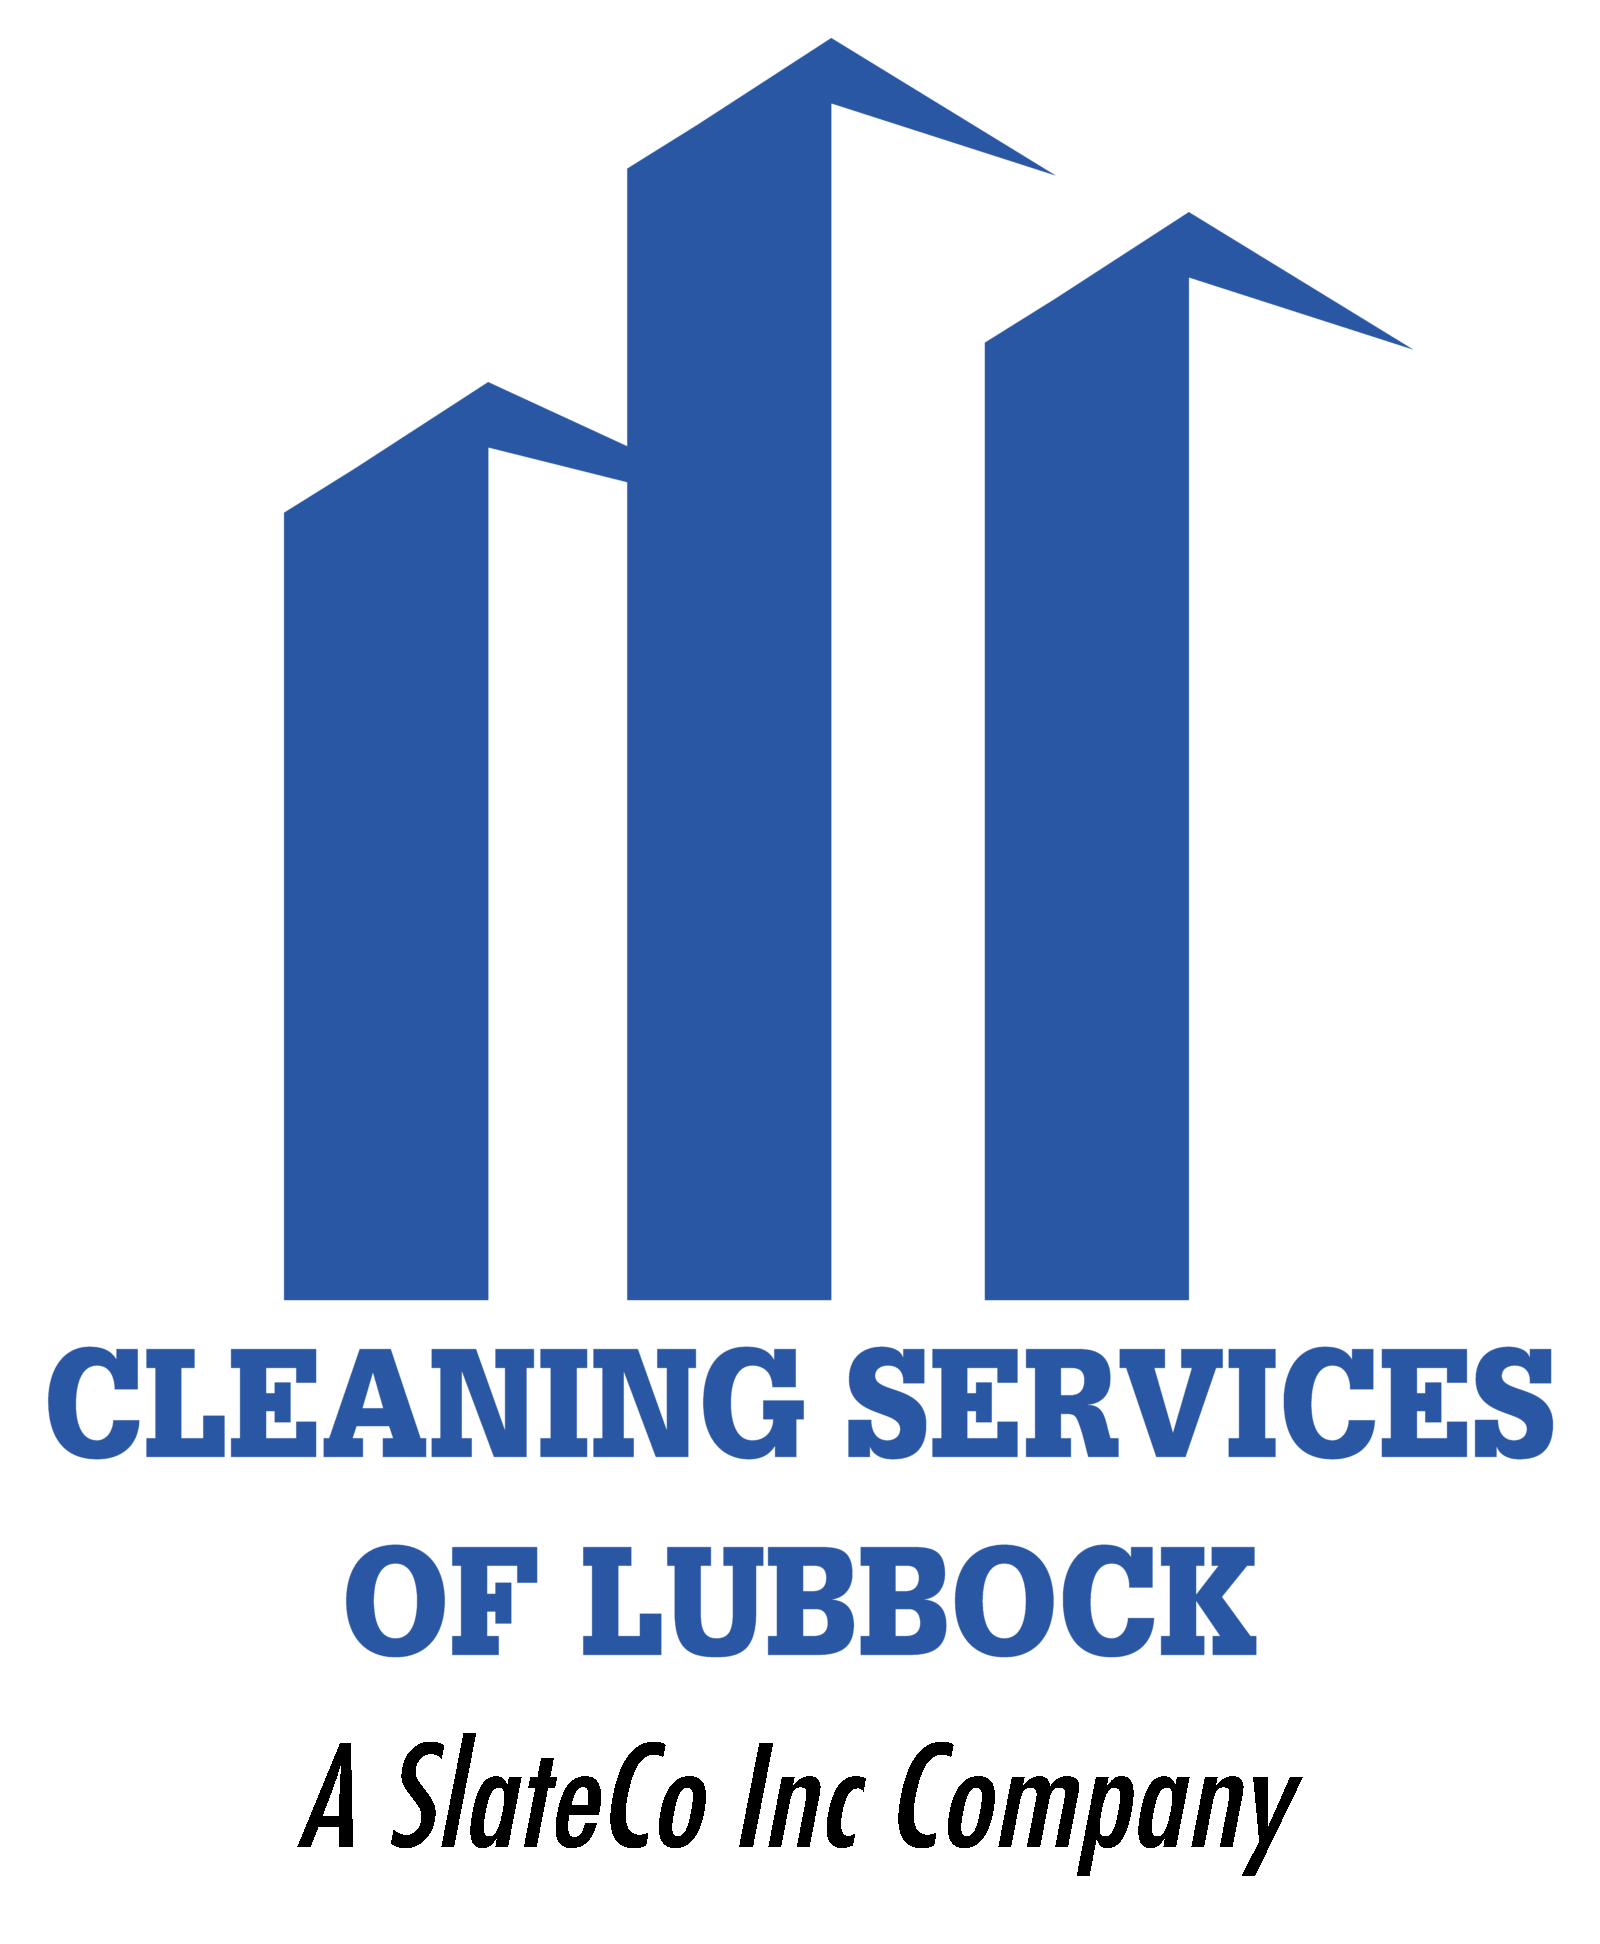 Cleaning Services of Lubbock